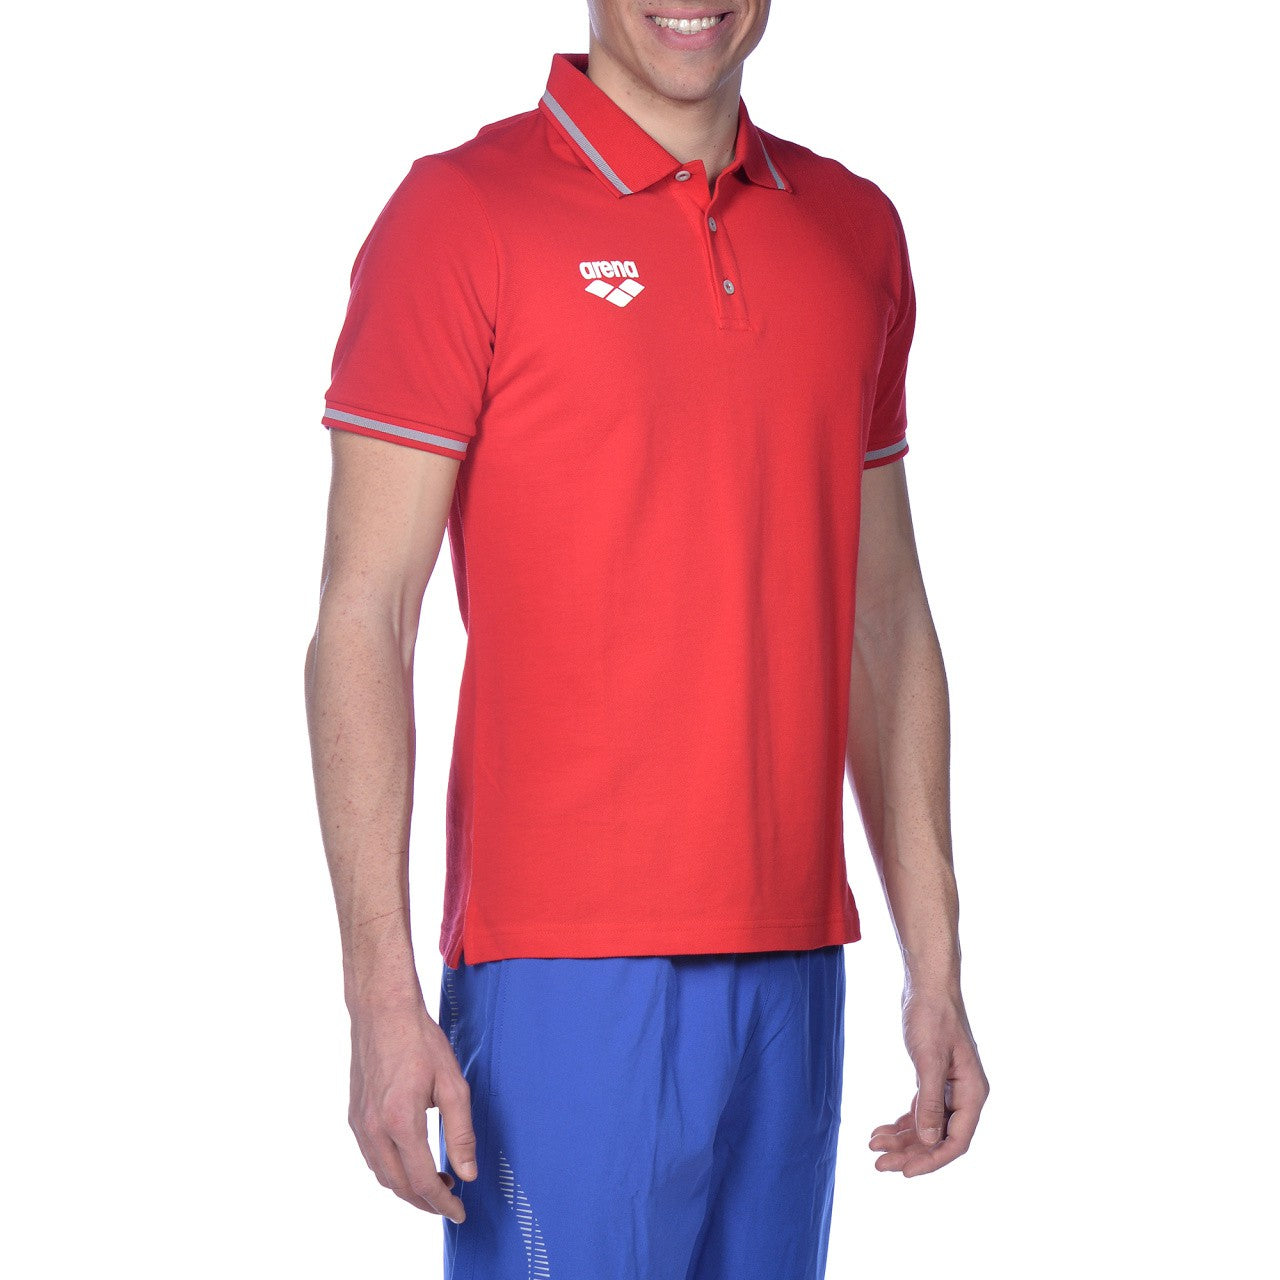 Tl S/S Polo red